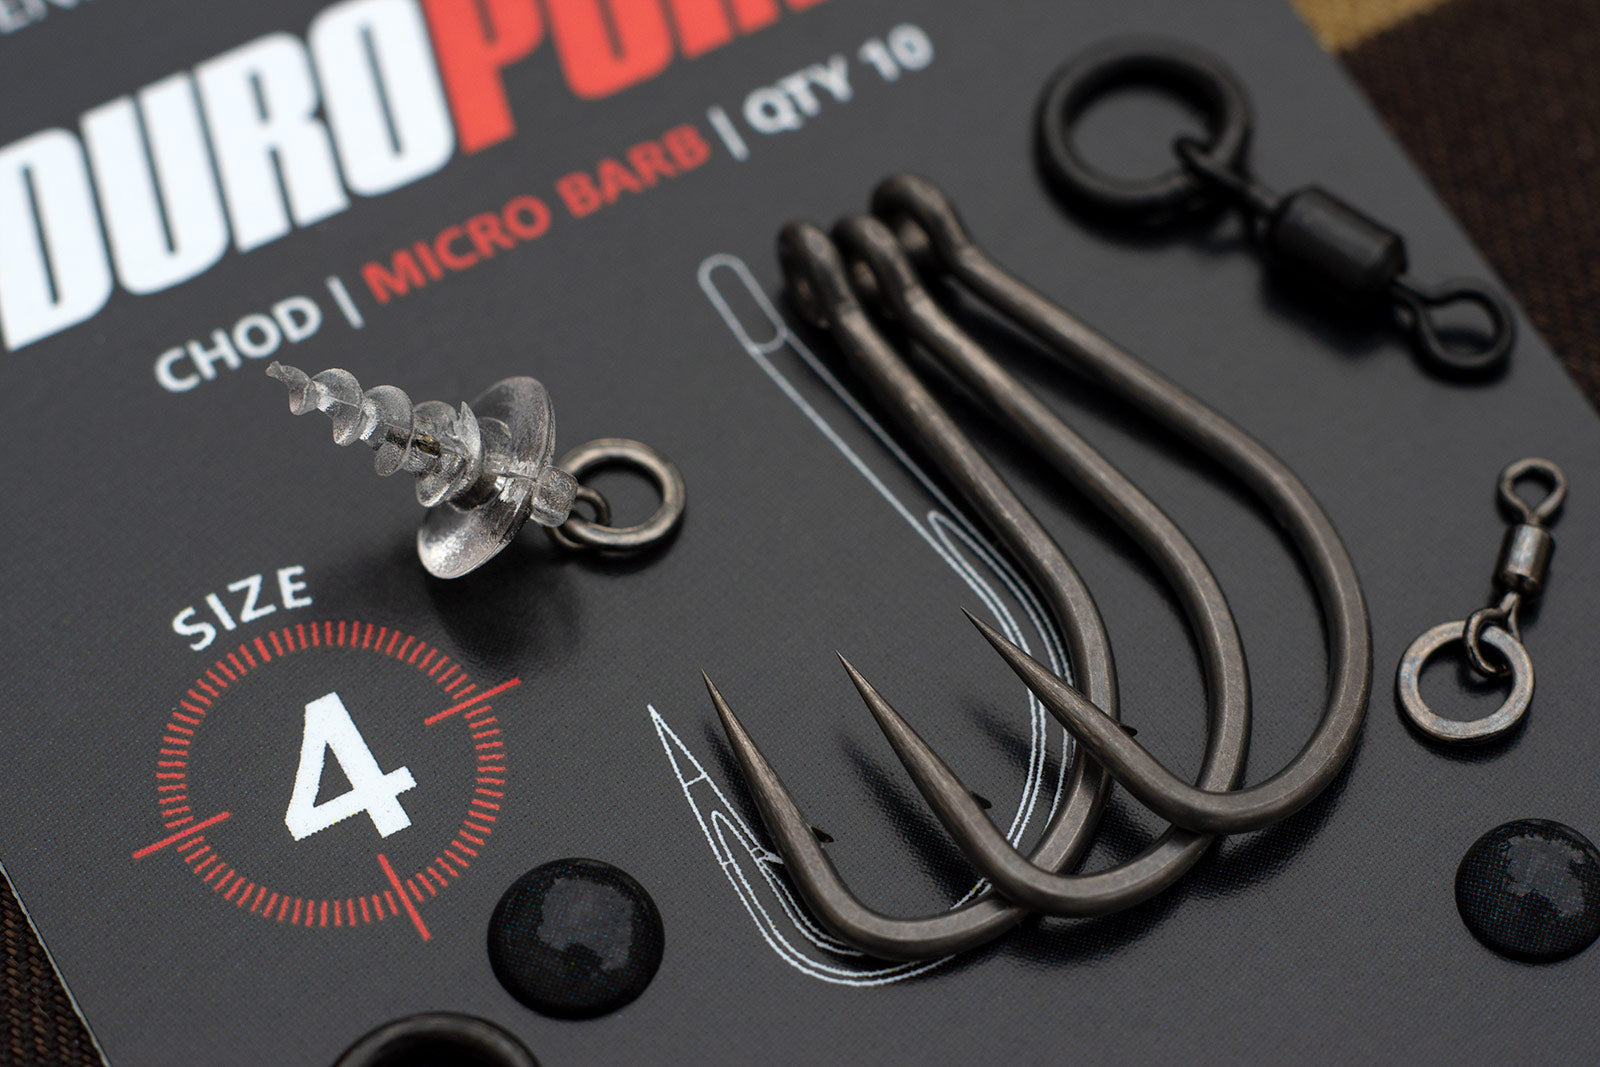 Take one of our Duropoint Chod hooks, We're using a size 5 Here